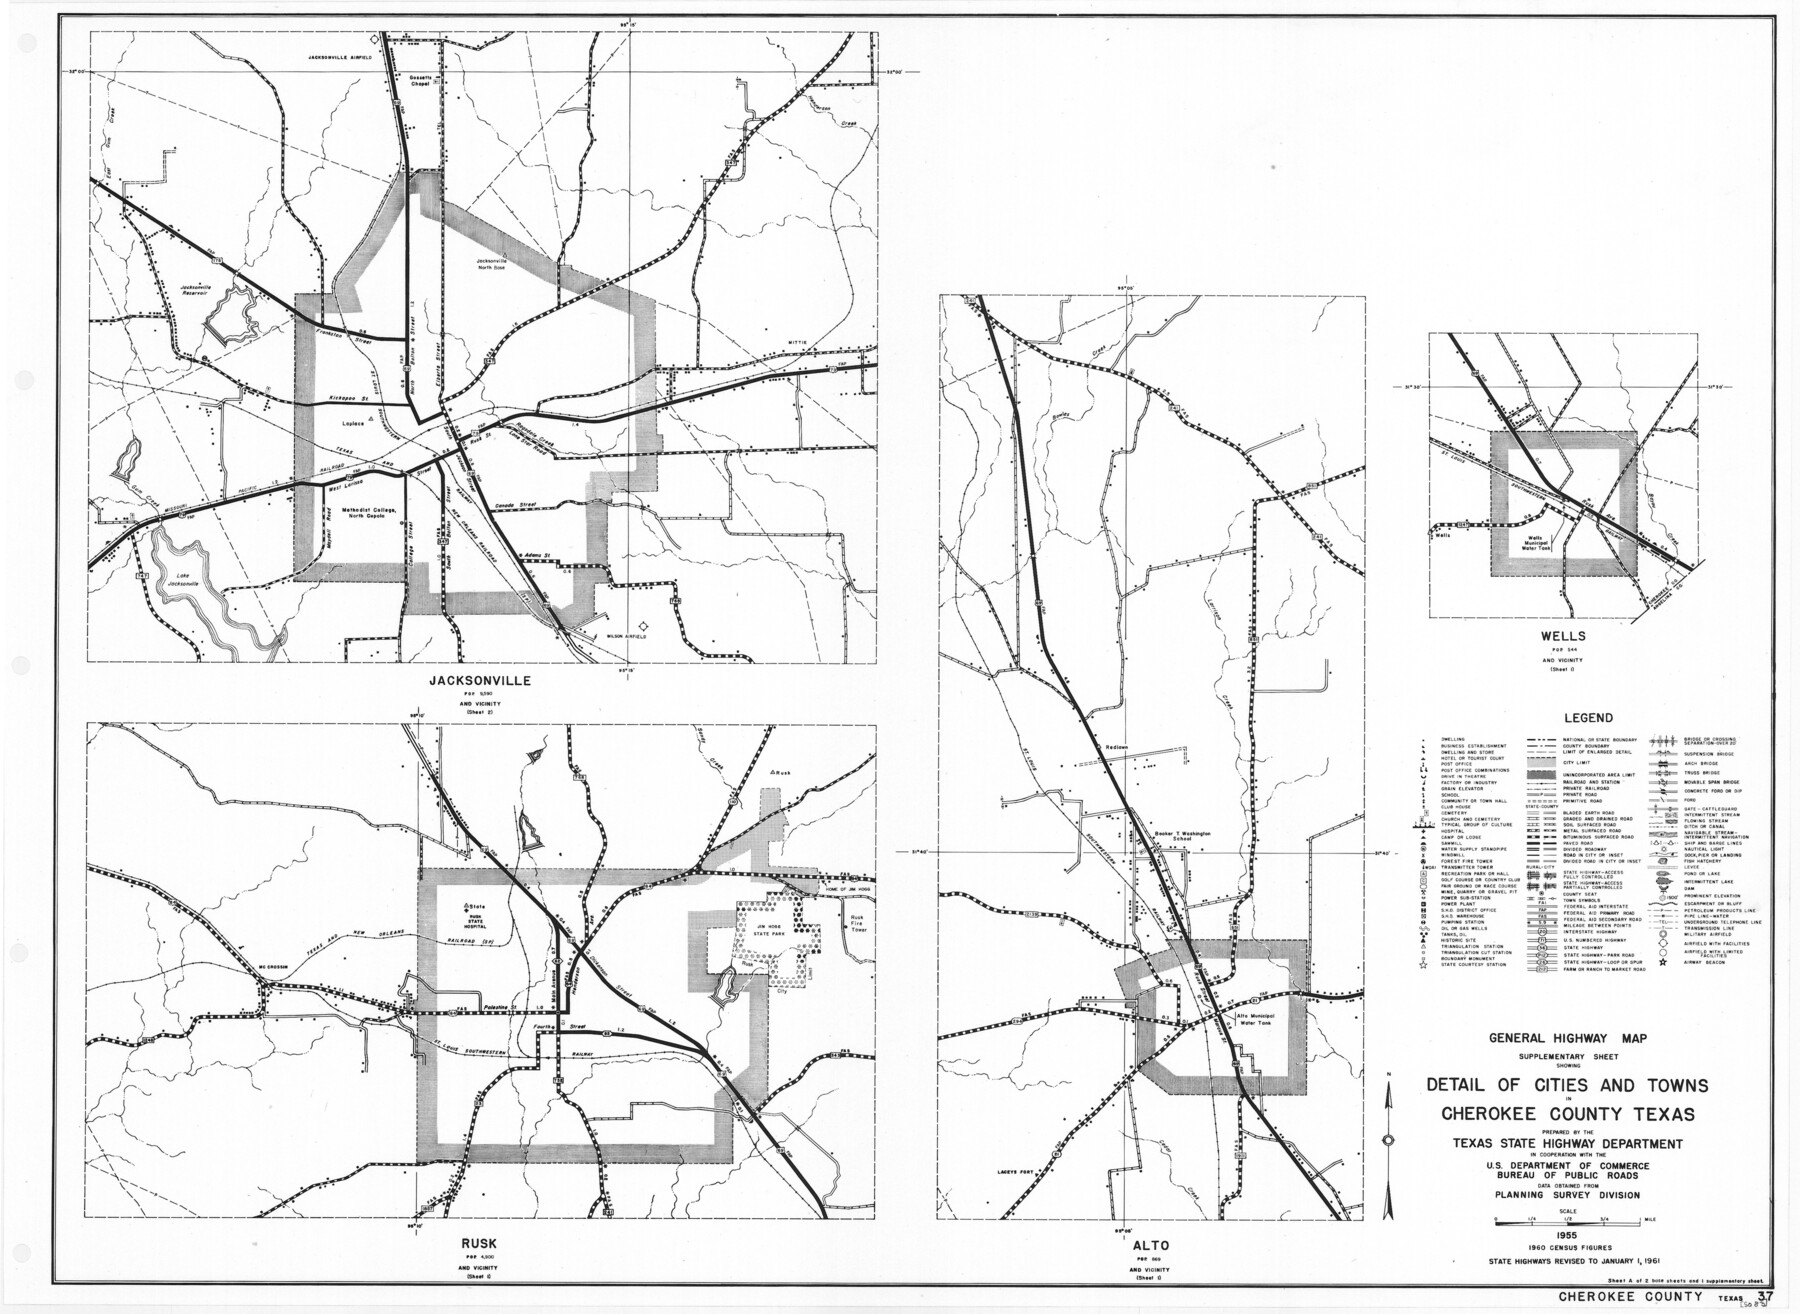 general-highway-map-detail-of-cities-and-towns-in-cherokee-county